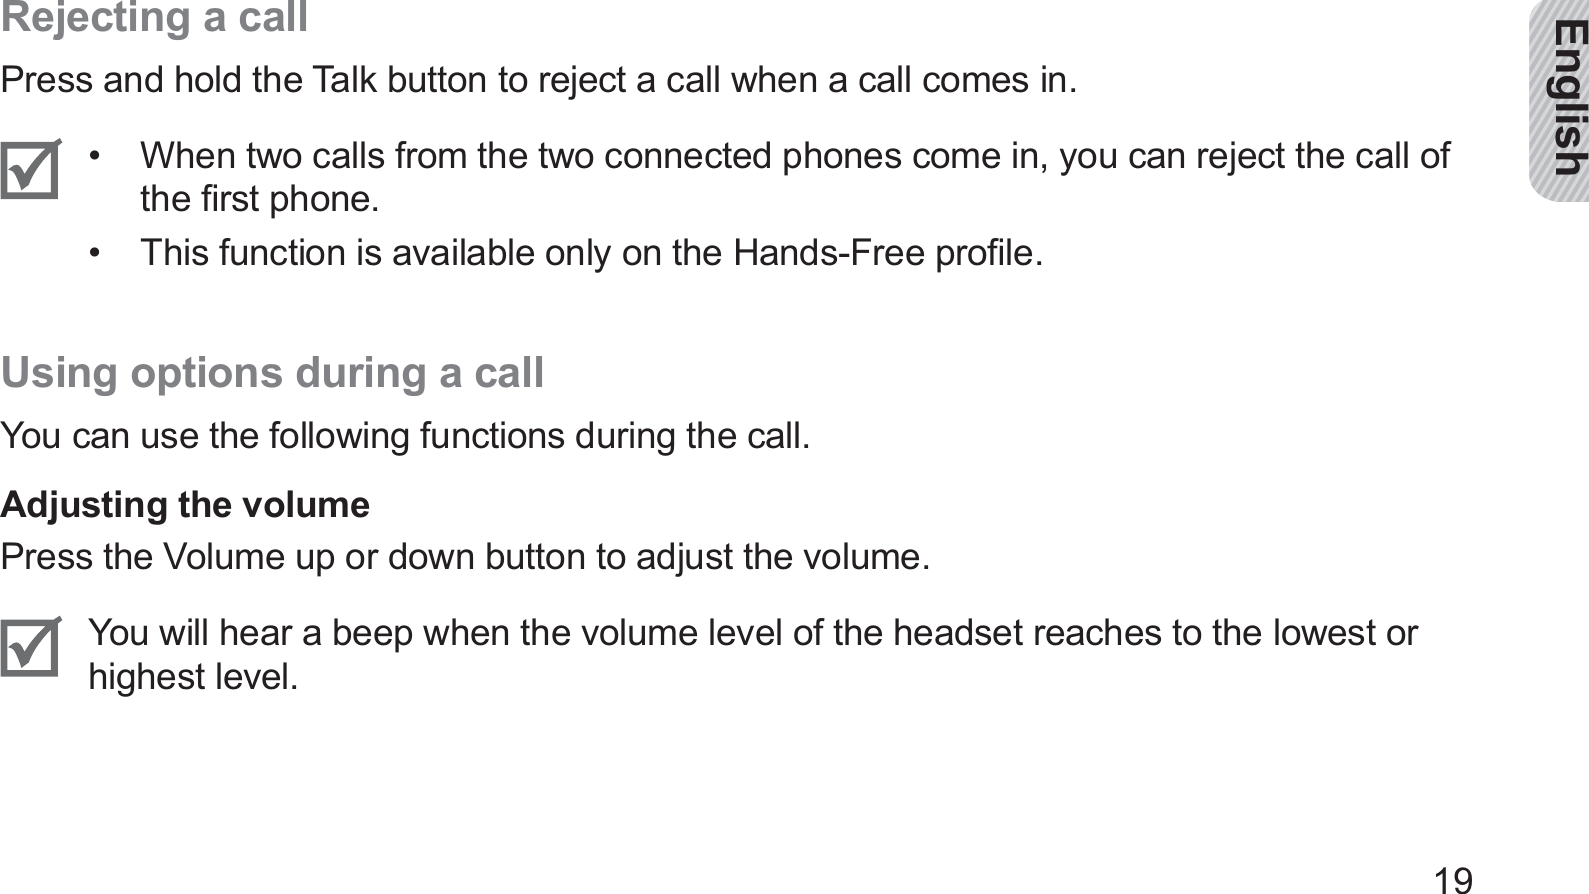 English19Rejecting a callPress and hold the Talk button to reject a call when a call comes in.When two calls from the two connected phones come in, you can reject the call of • the ﬁrst phone.This function is available only on the Hands-Free proﬁle.• Using options during a callYou can use the following functions during the call.Adjusting the volumePress the Volume up or down button to adjust the volume.You will hear a beep when the volume level of the headset reaches to the lowest or highest level.